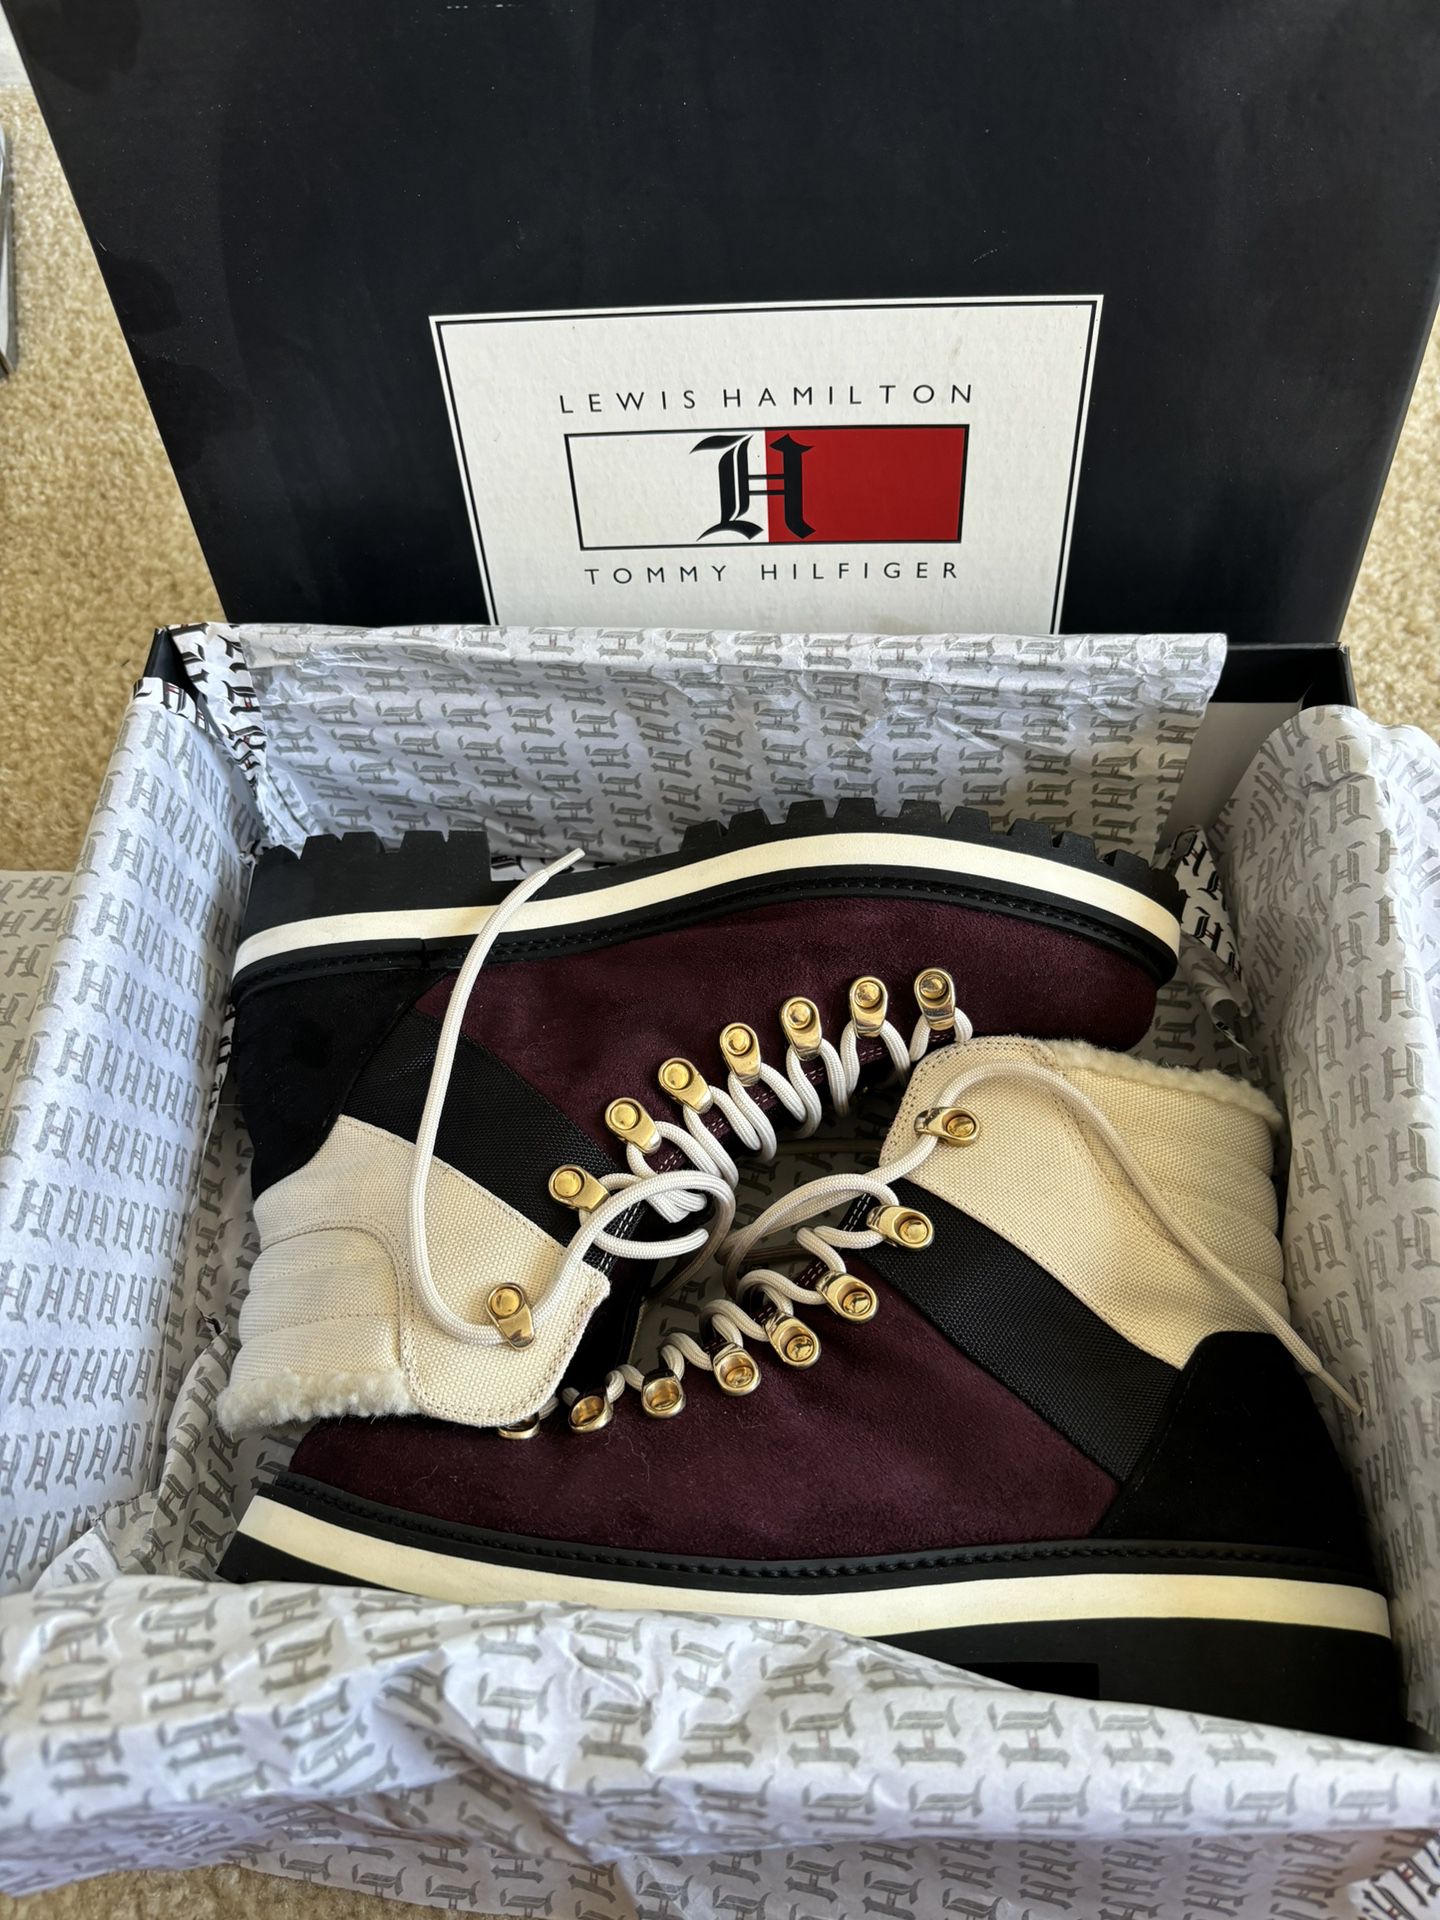 **NEVER WORN, ORIGINAL PACKAGING** Lewis Hamilton/Tommy Hilfiger Fall 2019 Color Block Boots